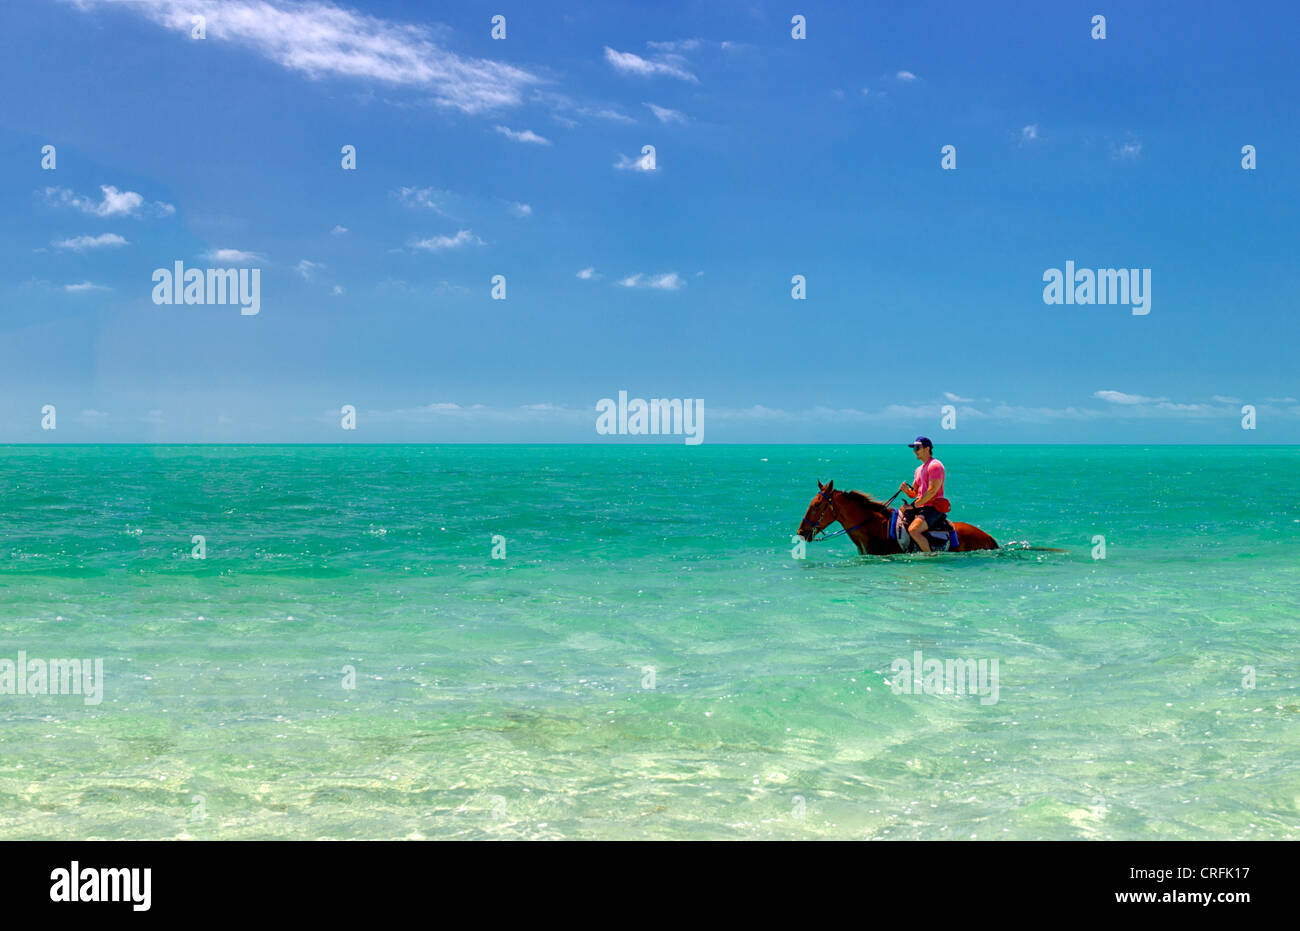 Horse rider in water. Providenciales. Turks and Caicos. Stock Photo